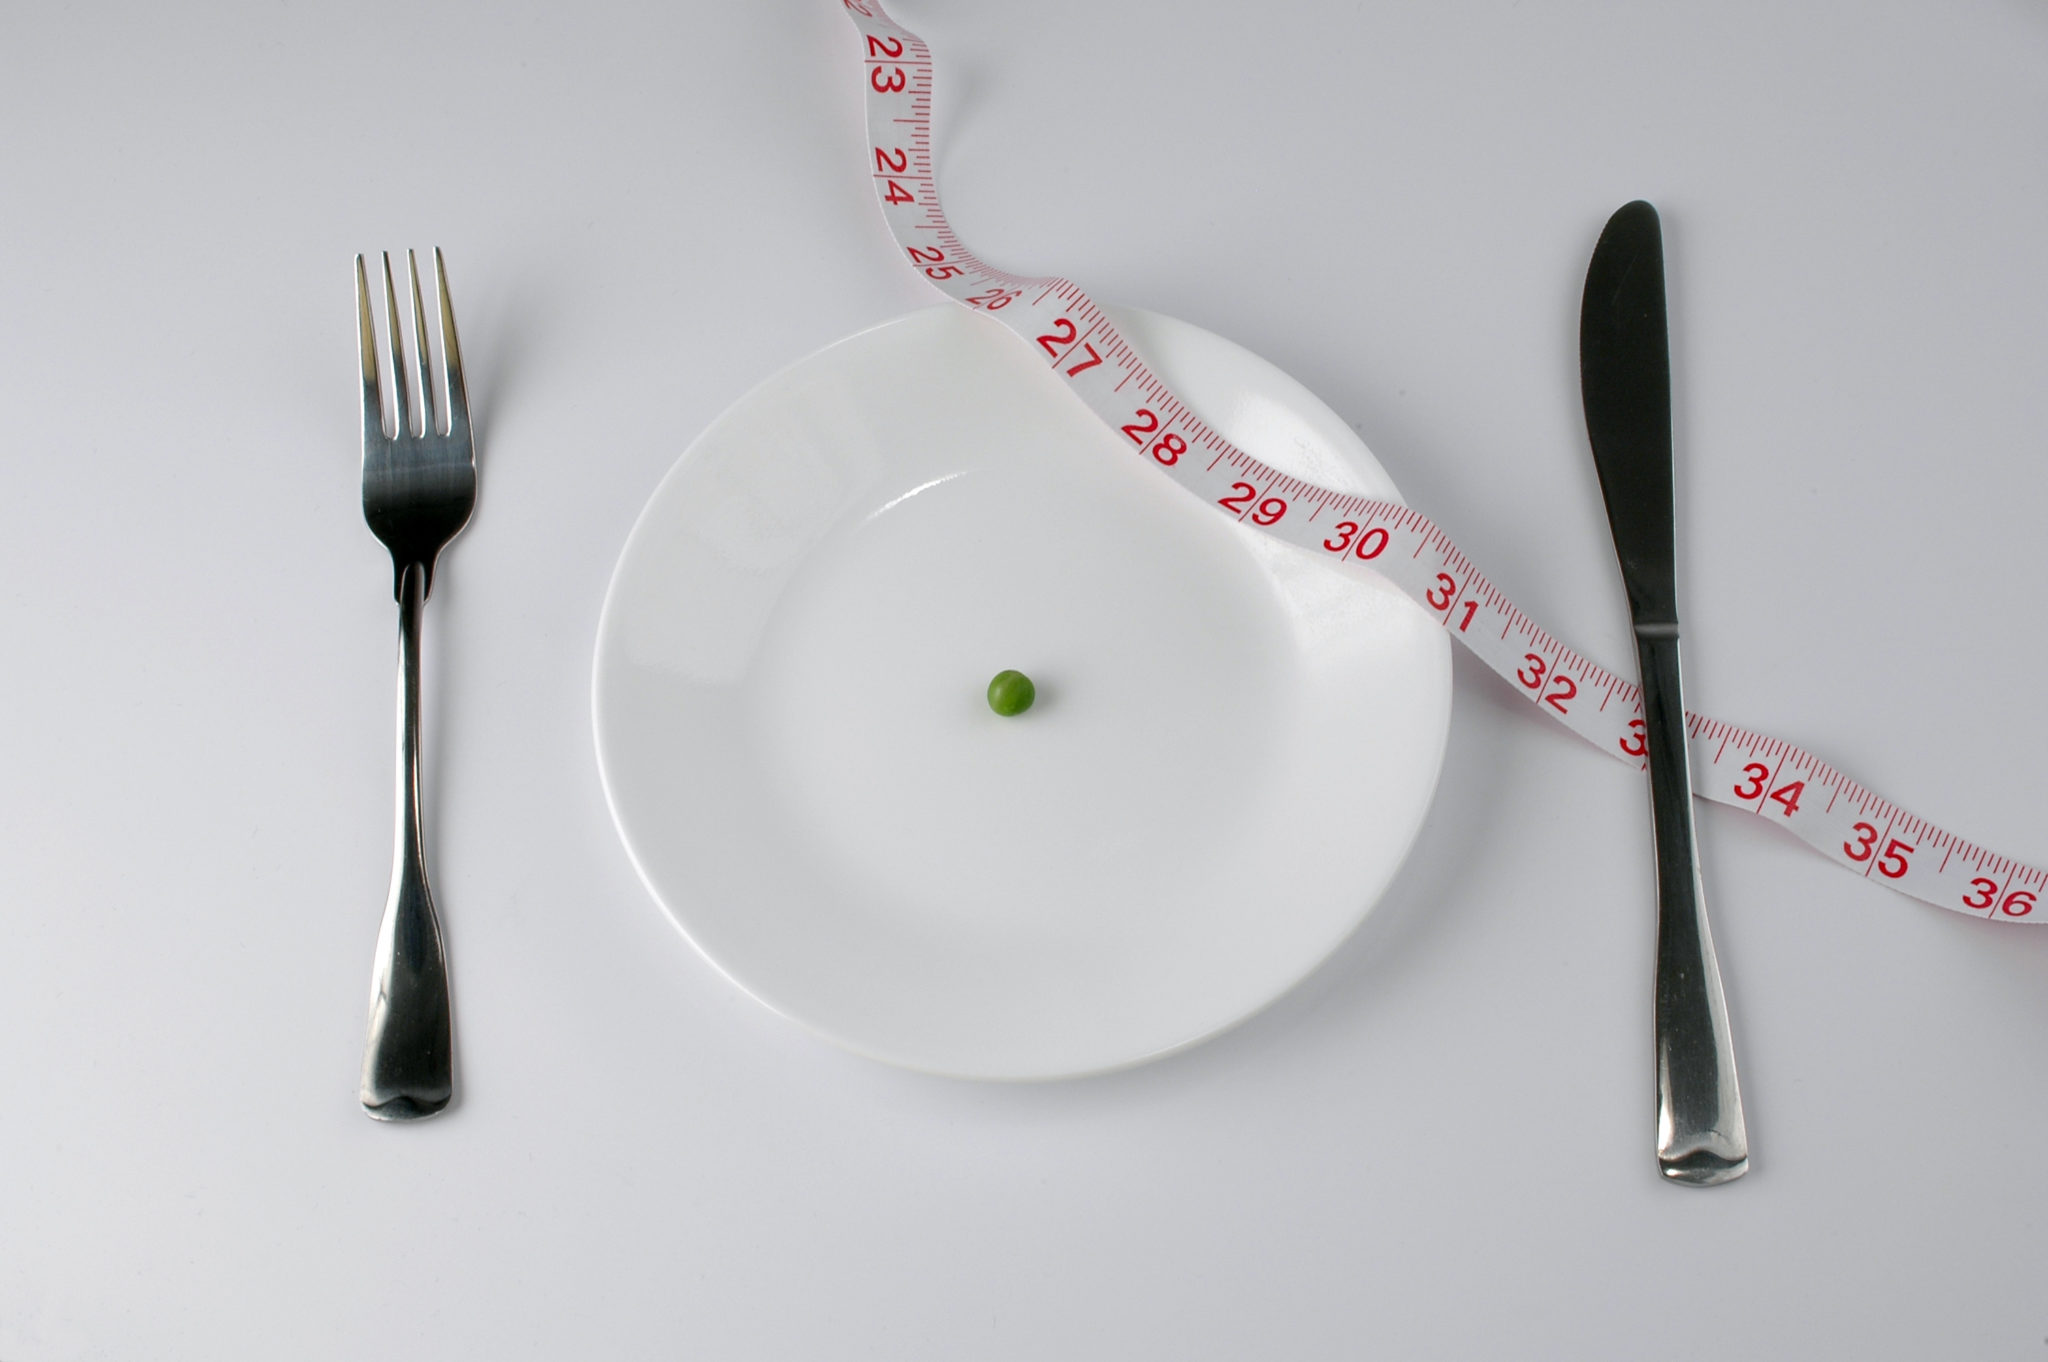 Extreme diet-empty plate except for a pea and tape measure 2048 x 1362